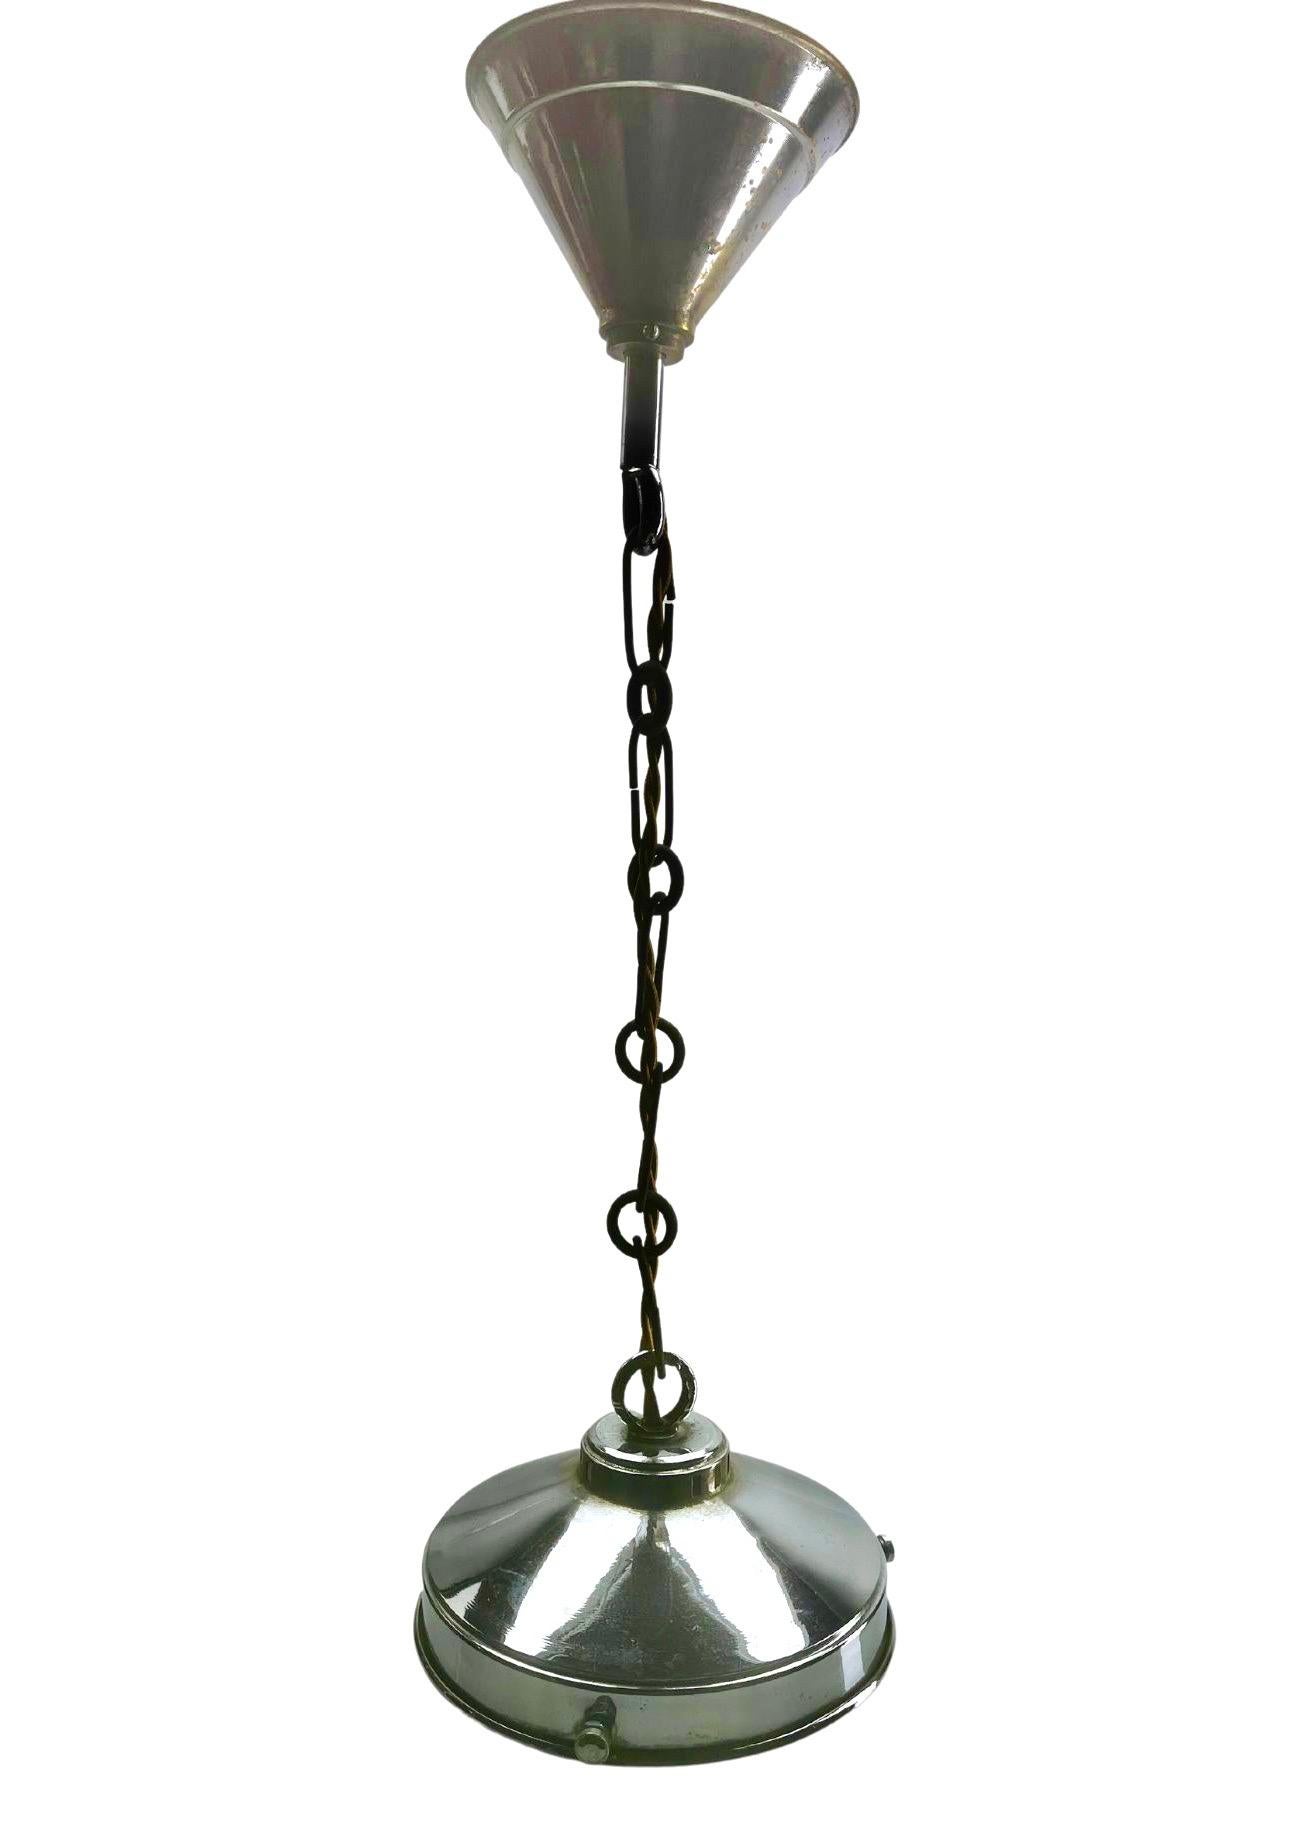 Phillips Pendant Lamp with a Opaline Shade and Chrome Fittings, 1930s, Holland For Sale 1